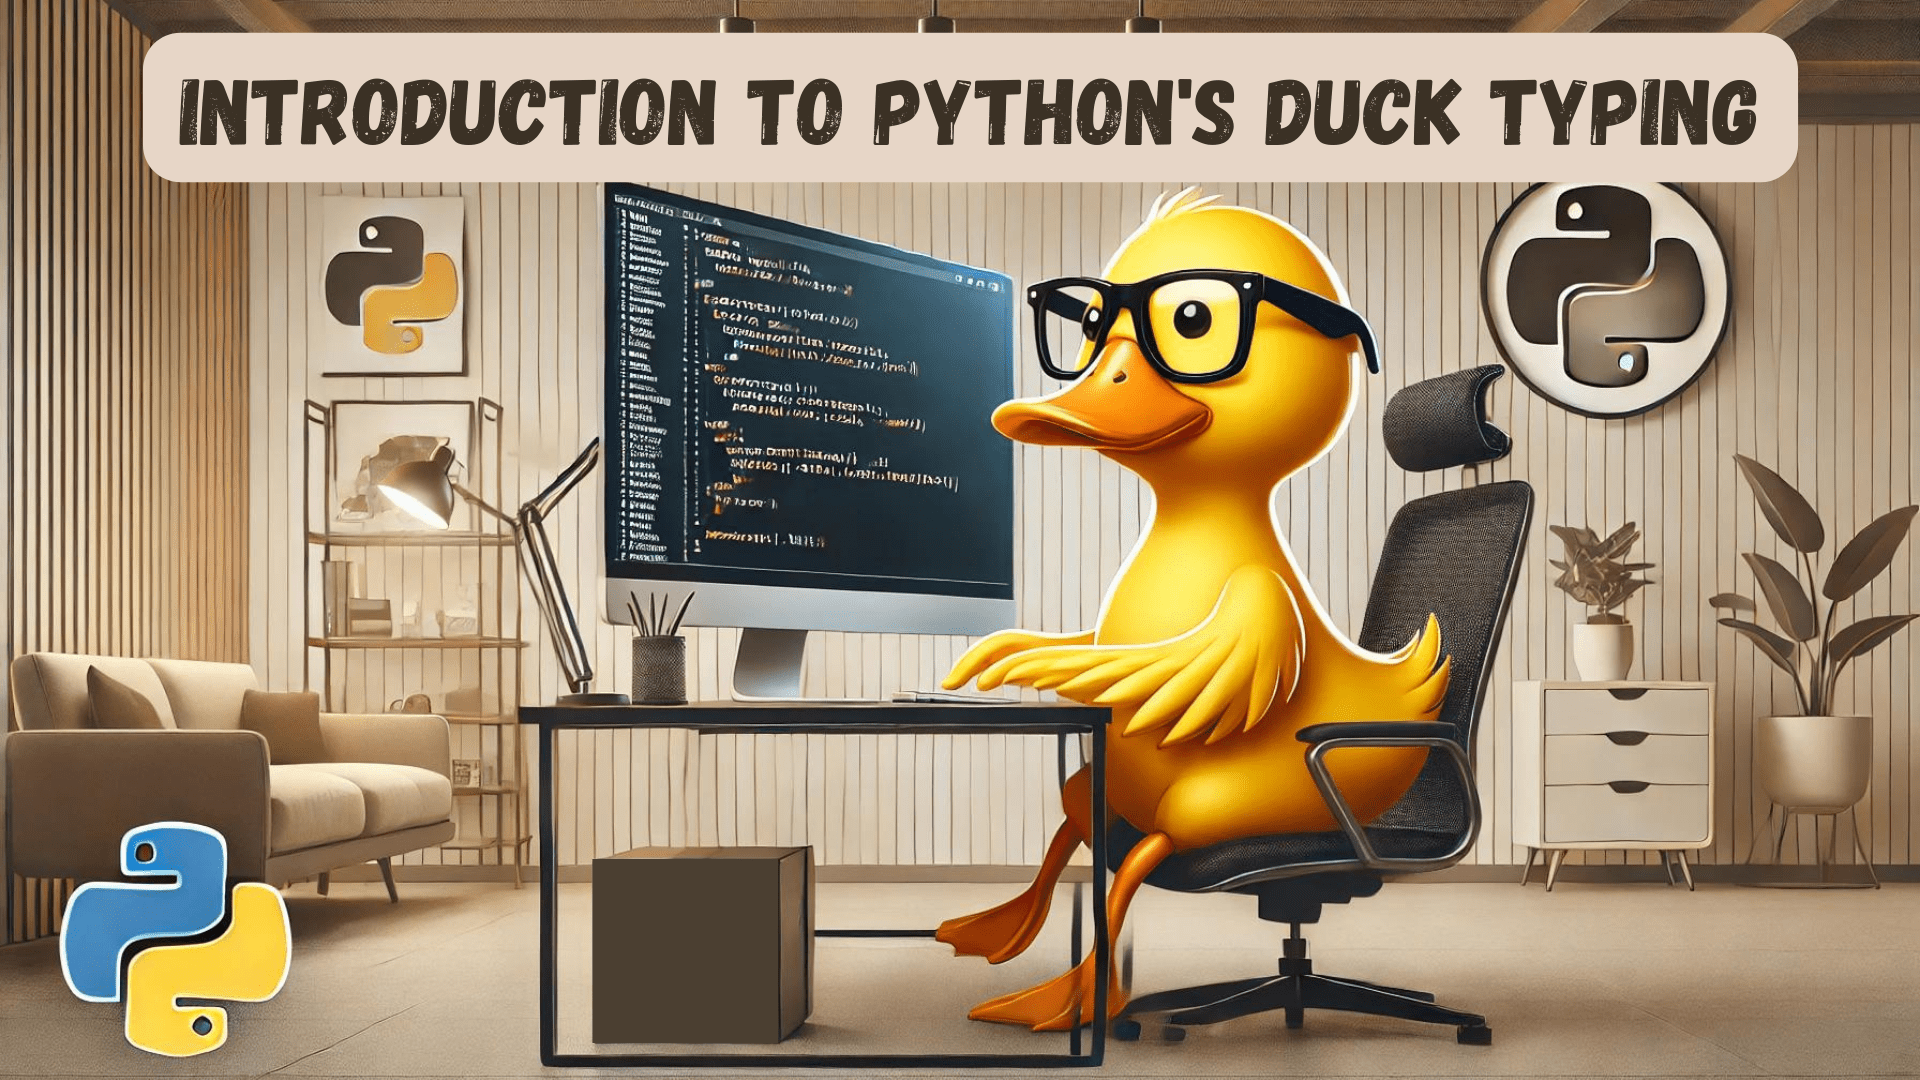 Duck, Duck, Code: An Introduction to Python’s Duck Typing